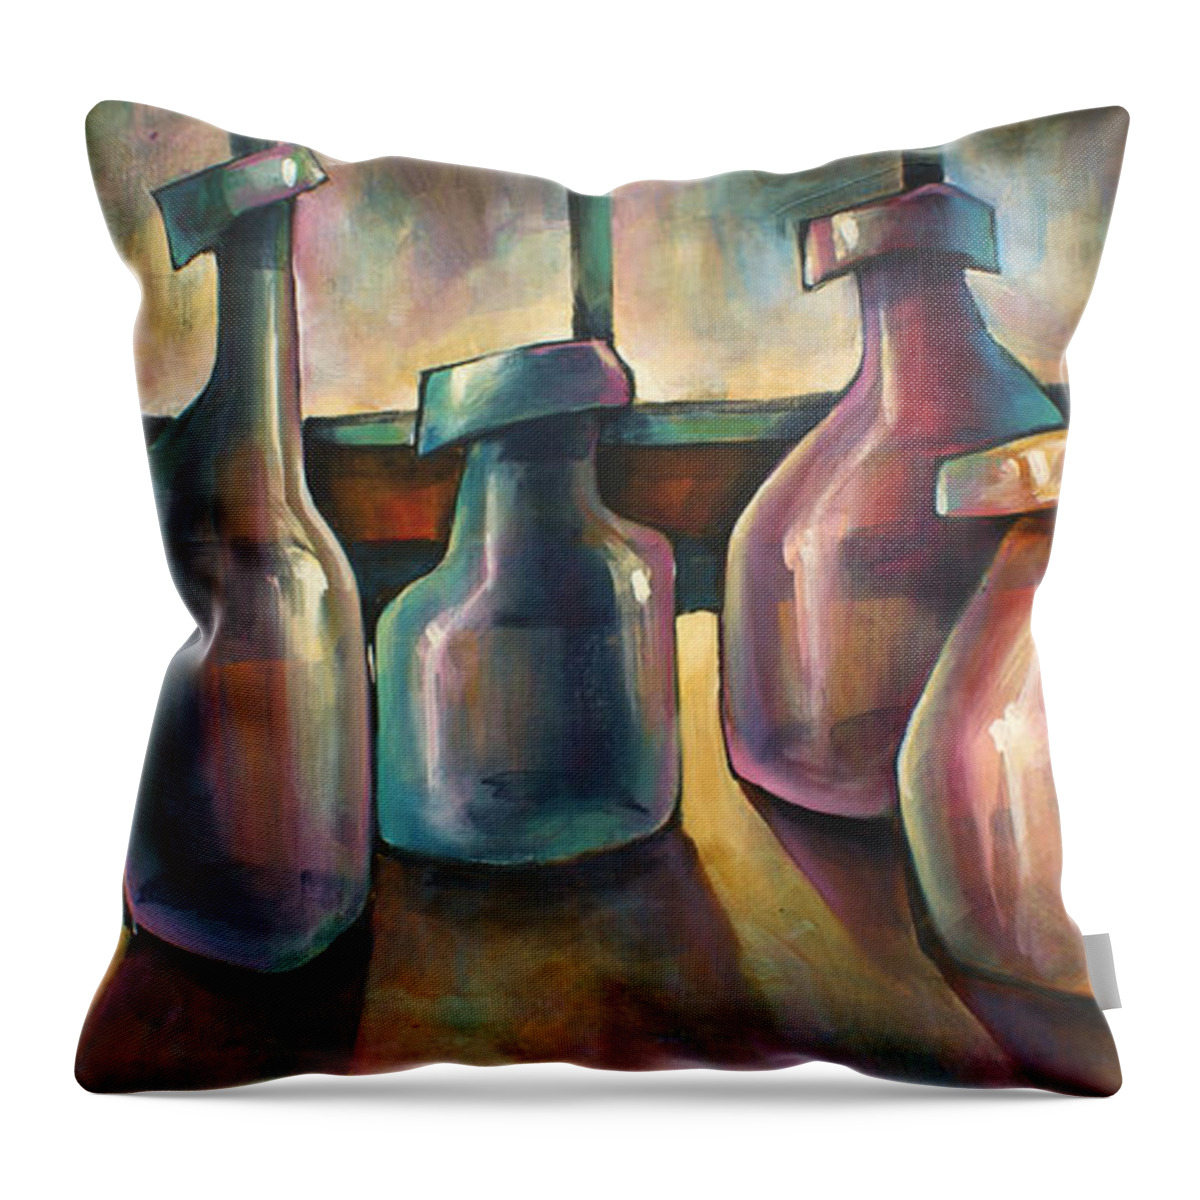 Still Life Throw Pillow featuring the painting 'Soldiers' by Michael Lang